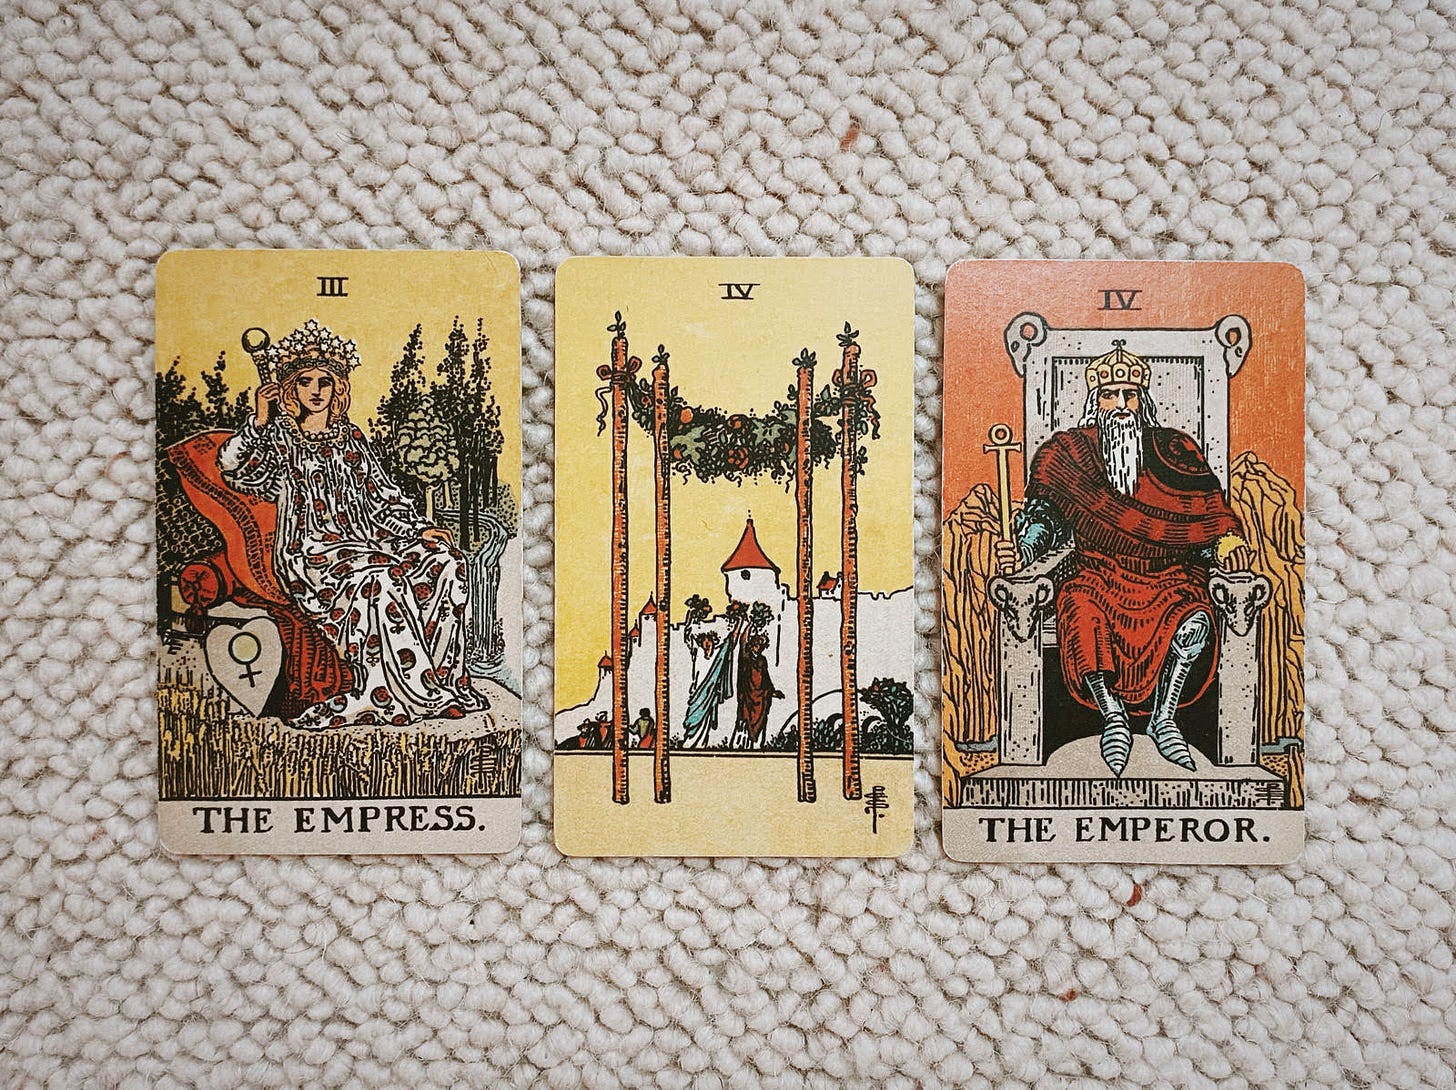 Image depicts three tarot cards, from left: The Empress, the four of Wands, and the Emperor